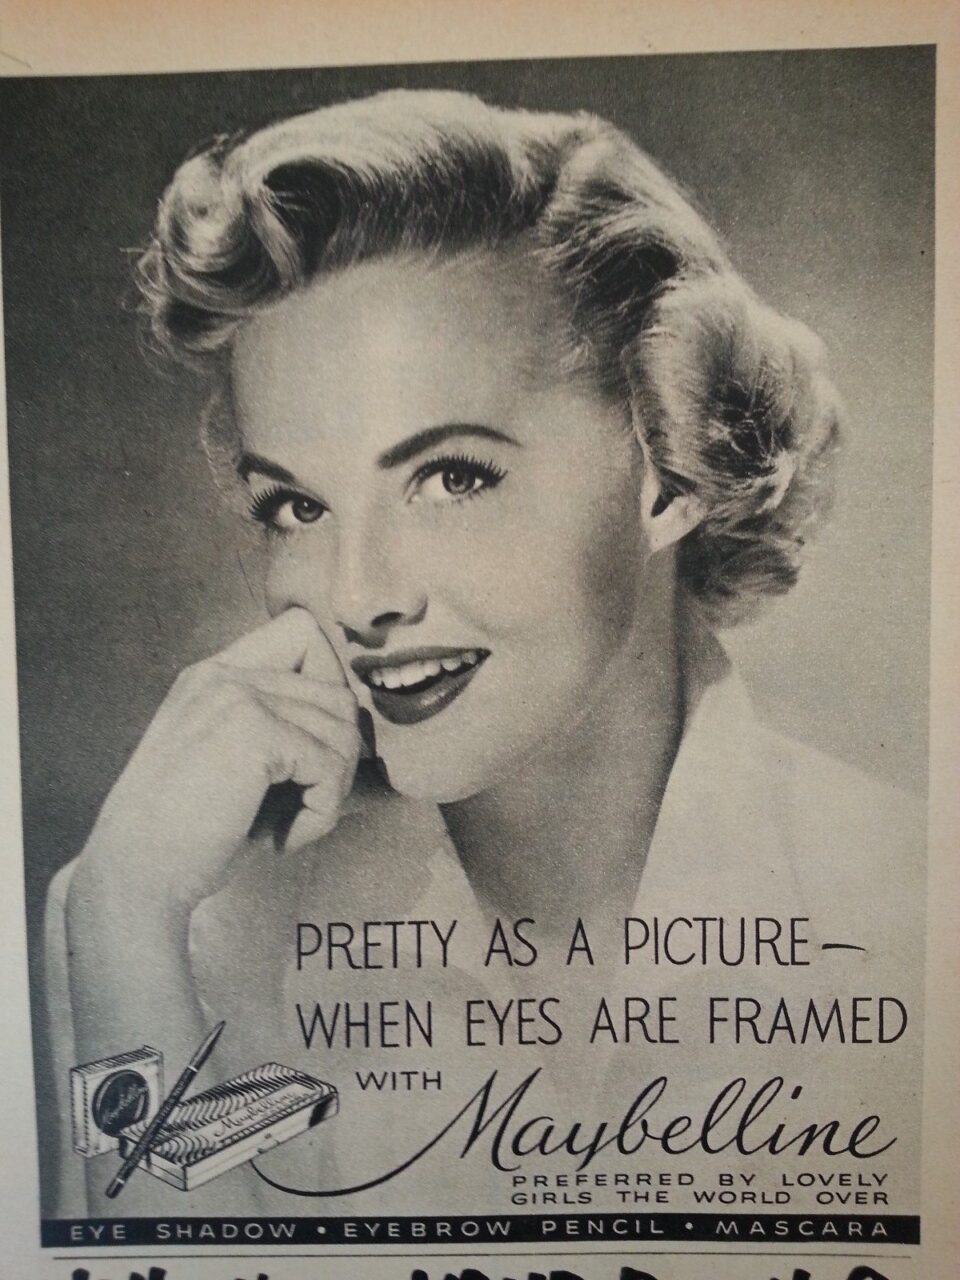 Old Maybelline ad stating ‘Pretty as a Picture—When eyes are framed with Maybelline”